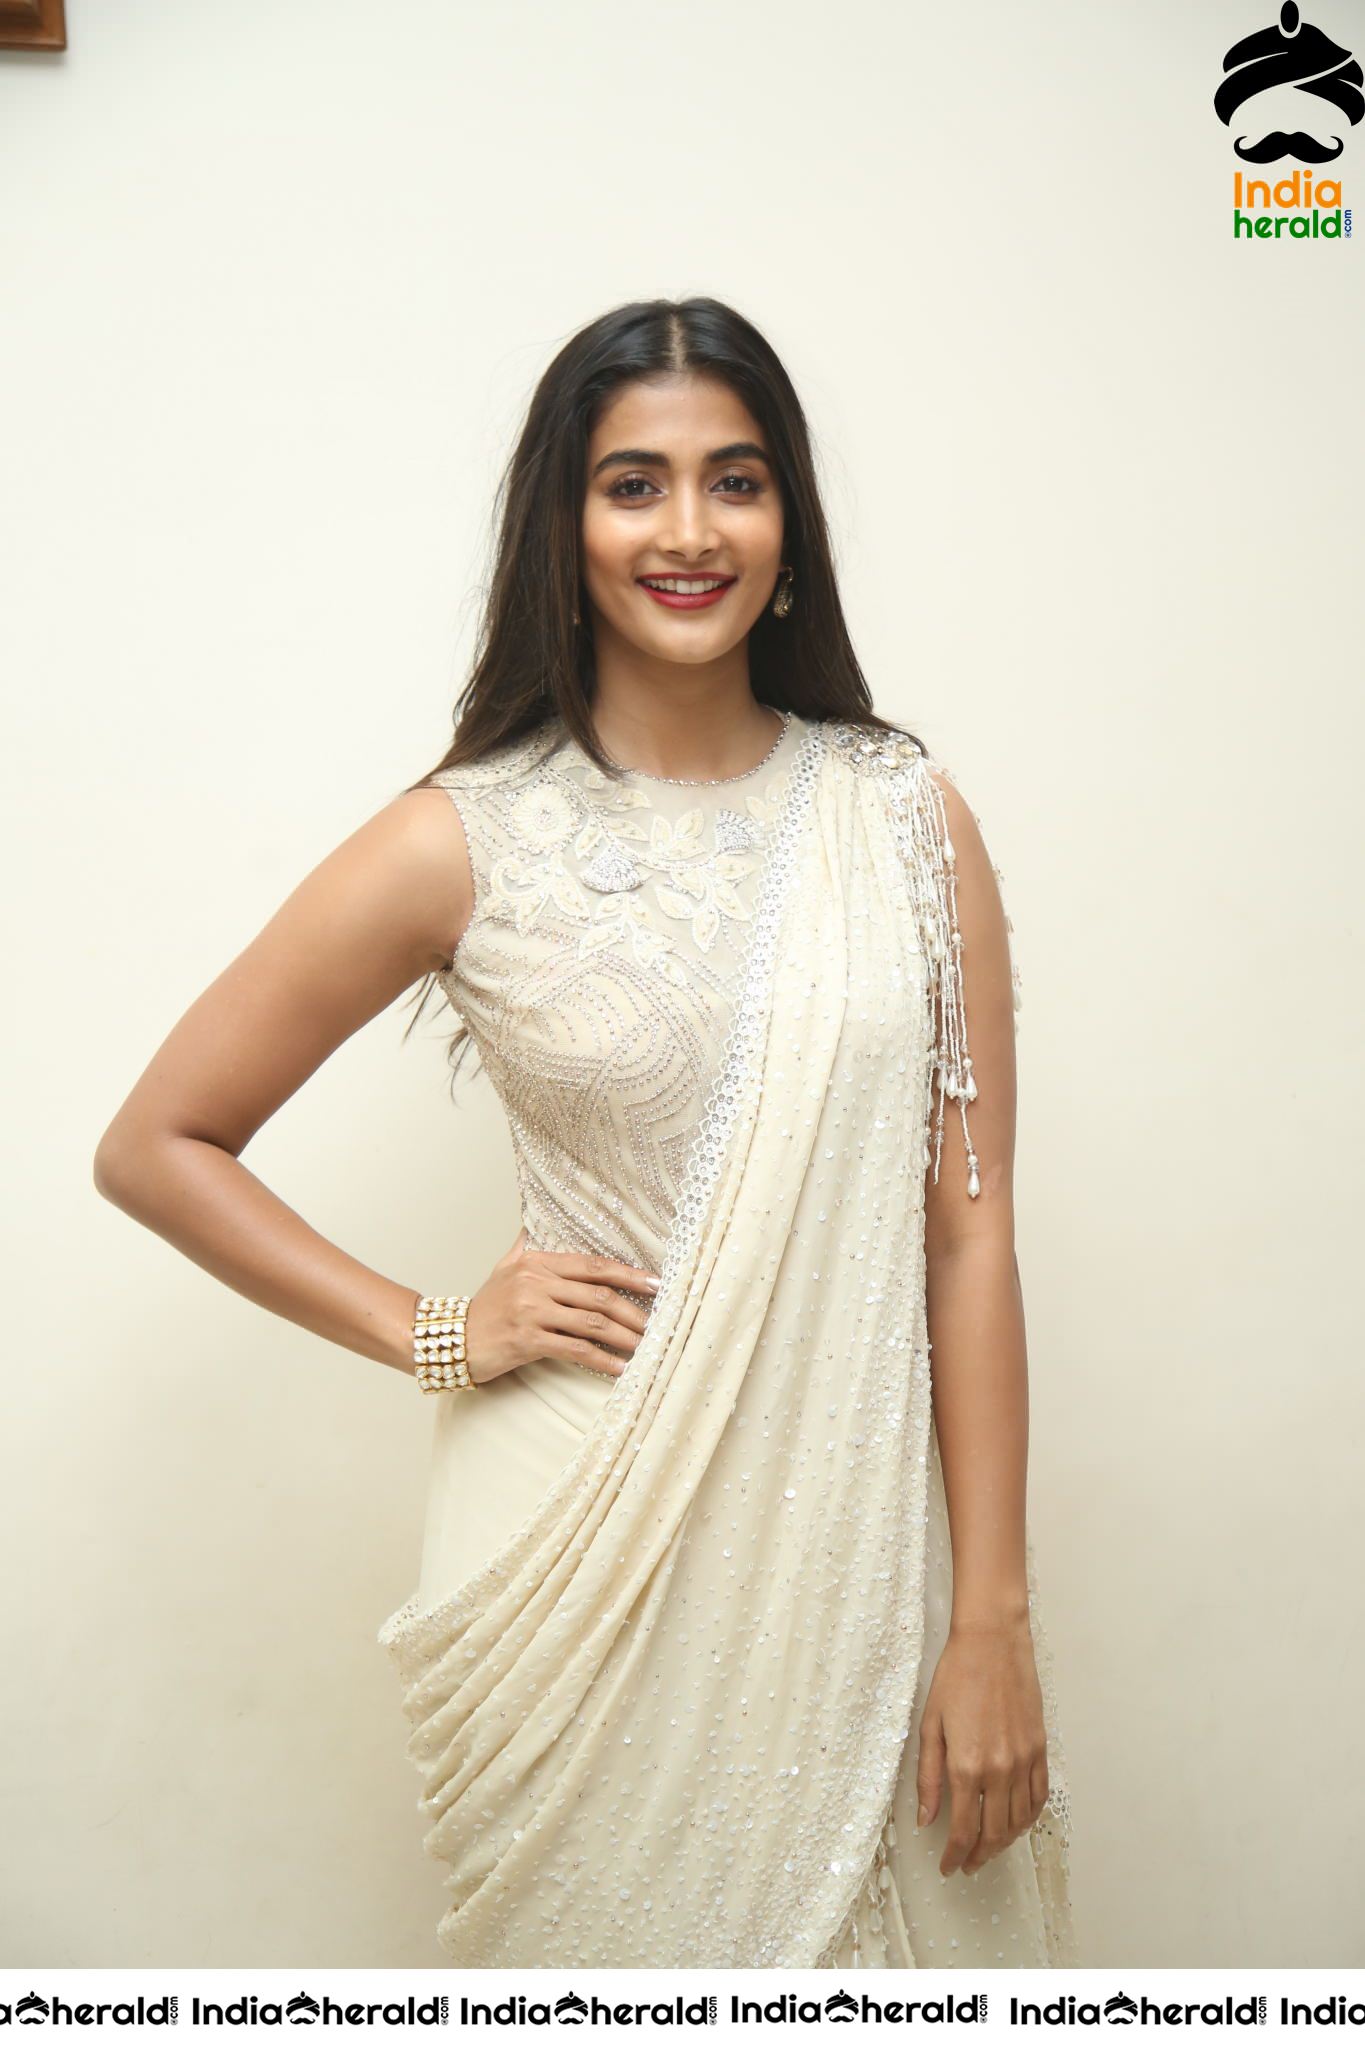 Pooja Hegde Looking Tempting and Cute in This Costume Set 1